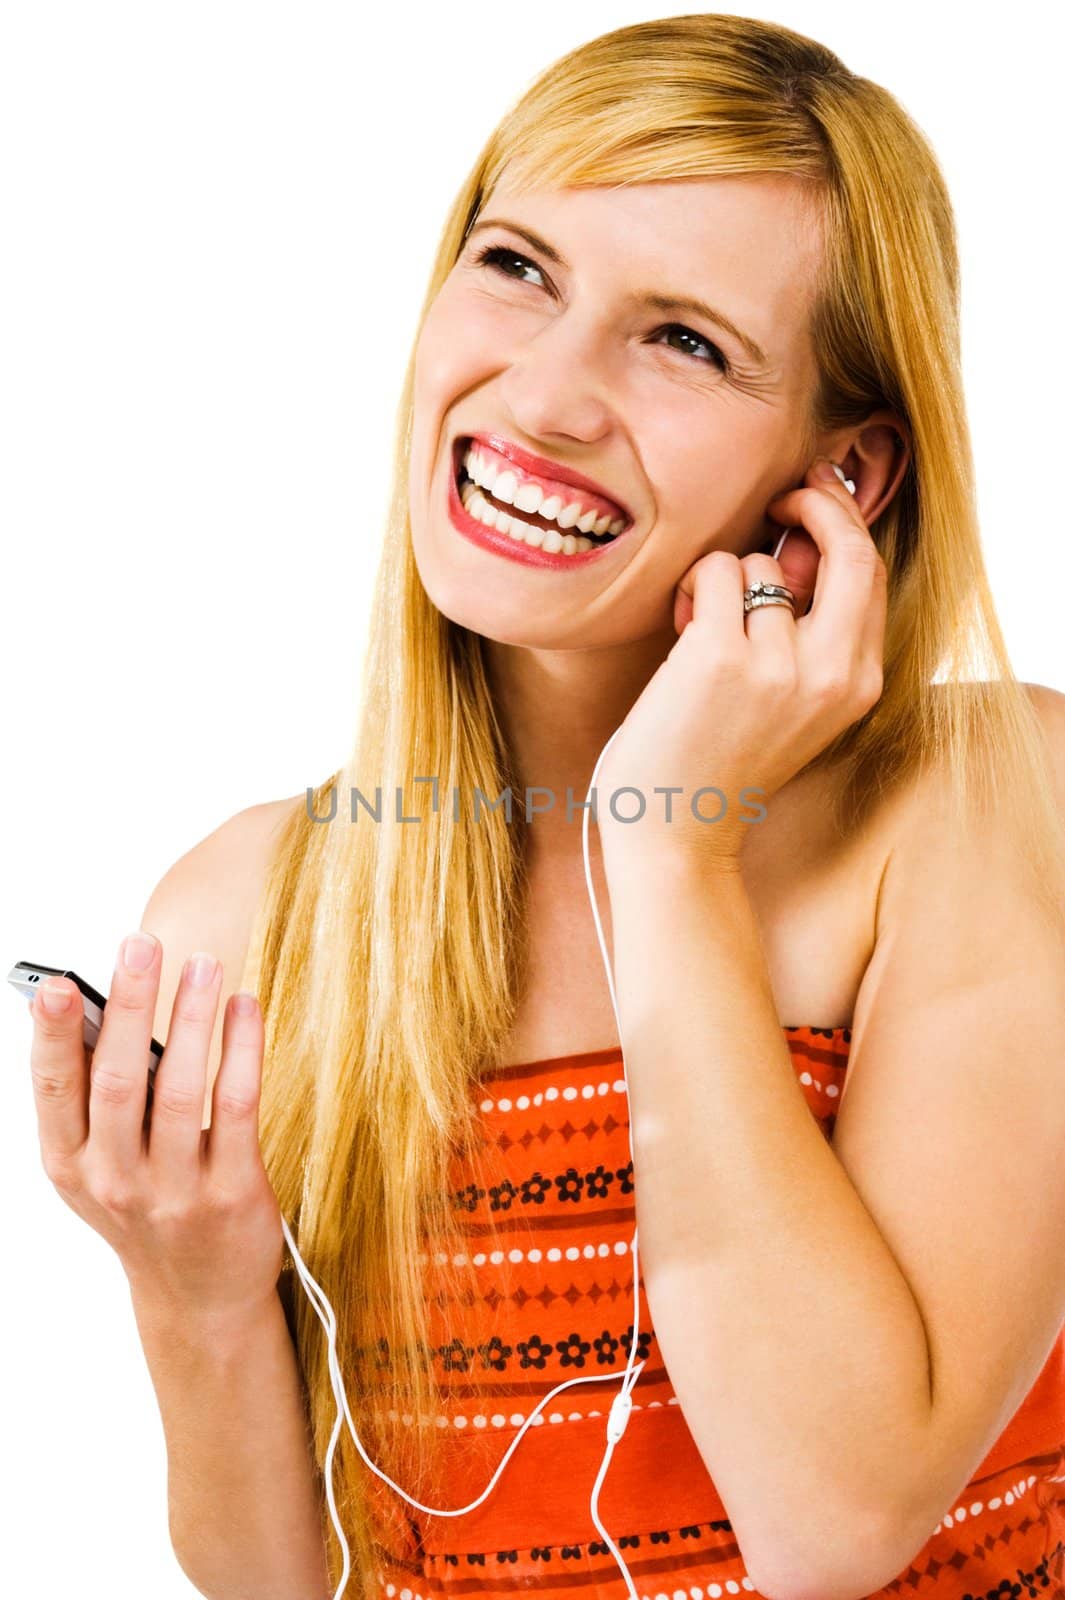 Cheerful woman listening to music on MP3 player isolated over white